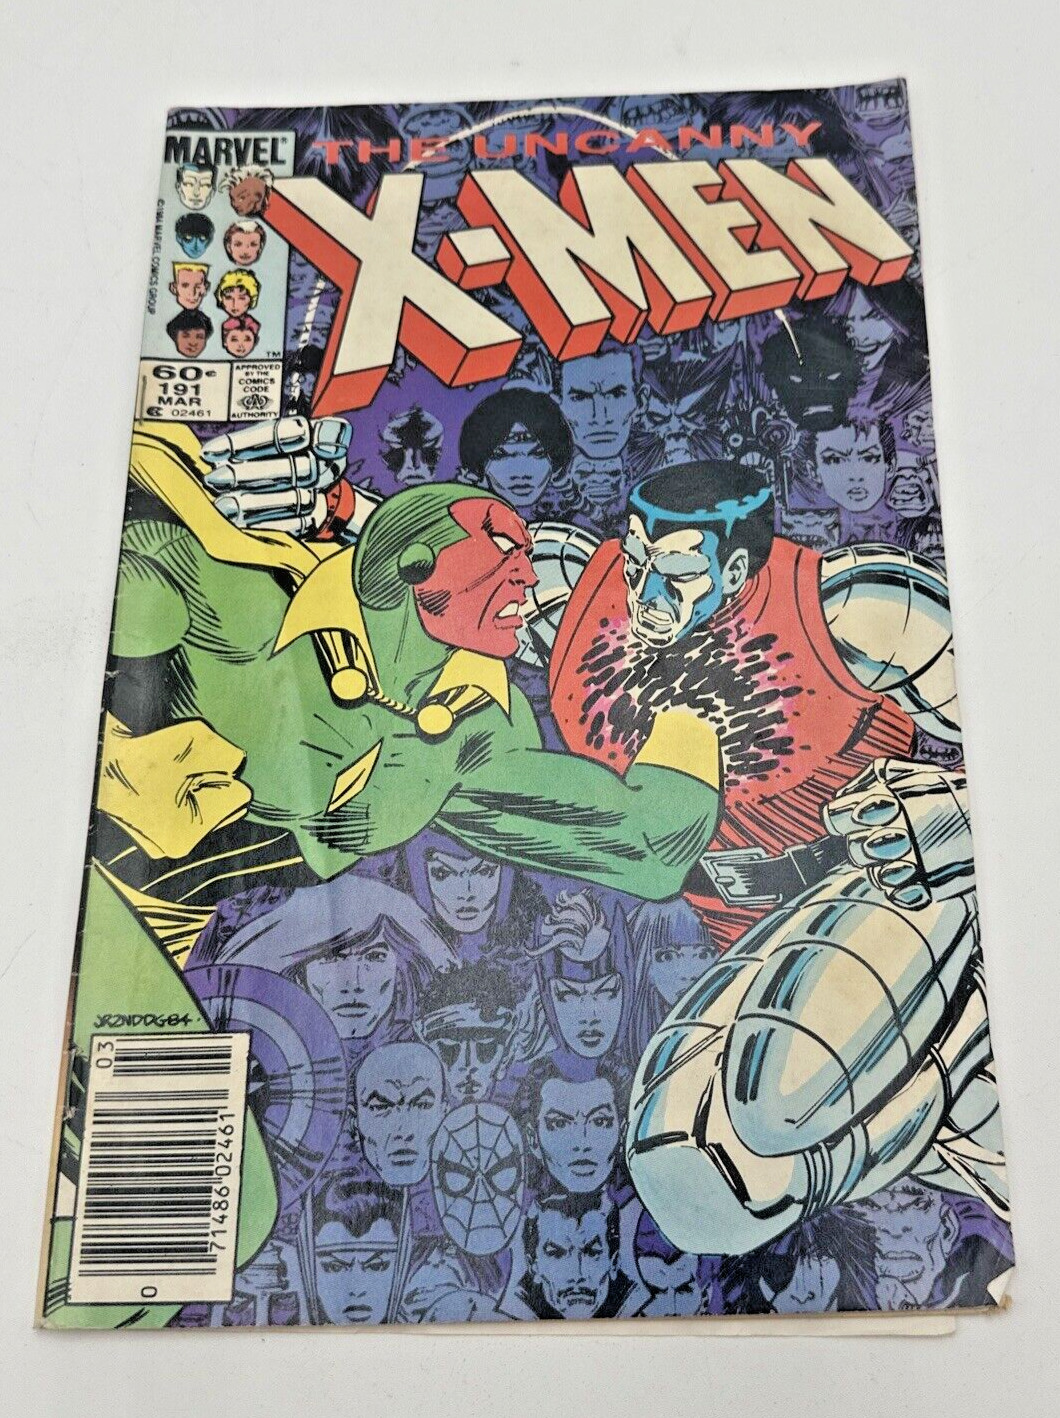 Uncanny X-men #191 March 1984 Marvel Comics Raiders of the Lost Temple Newsstand